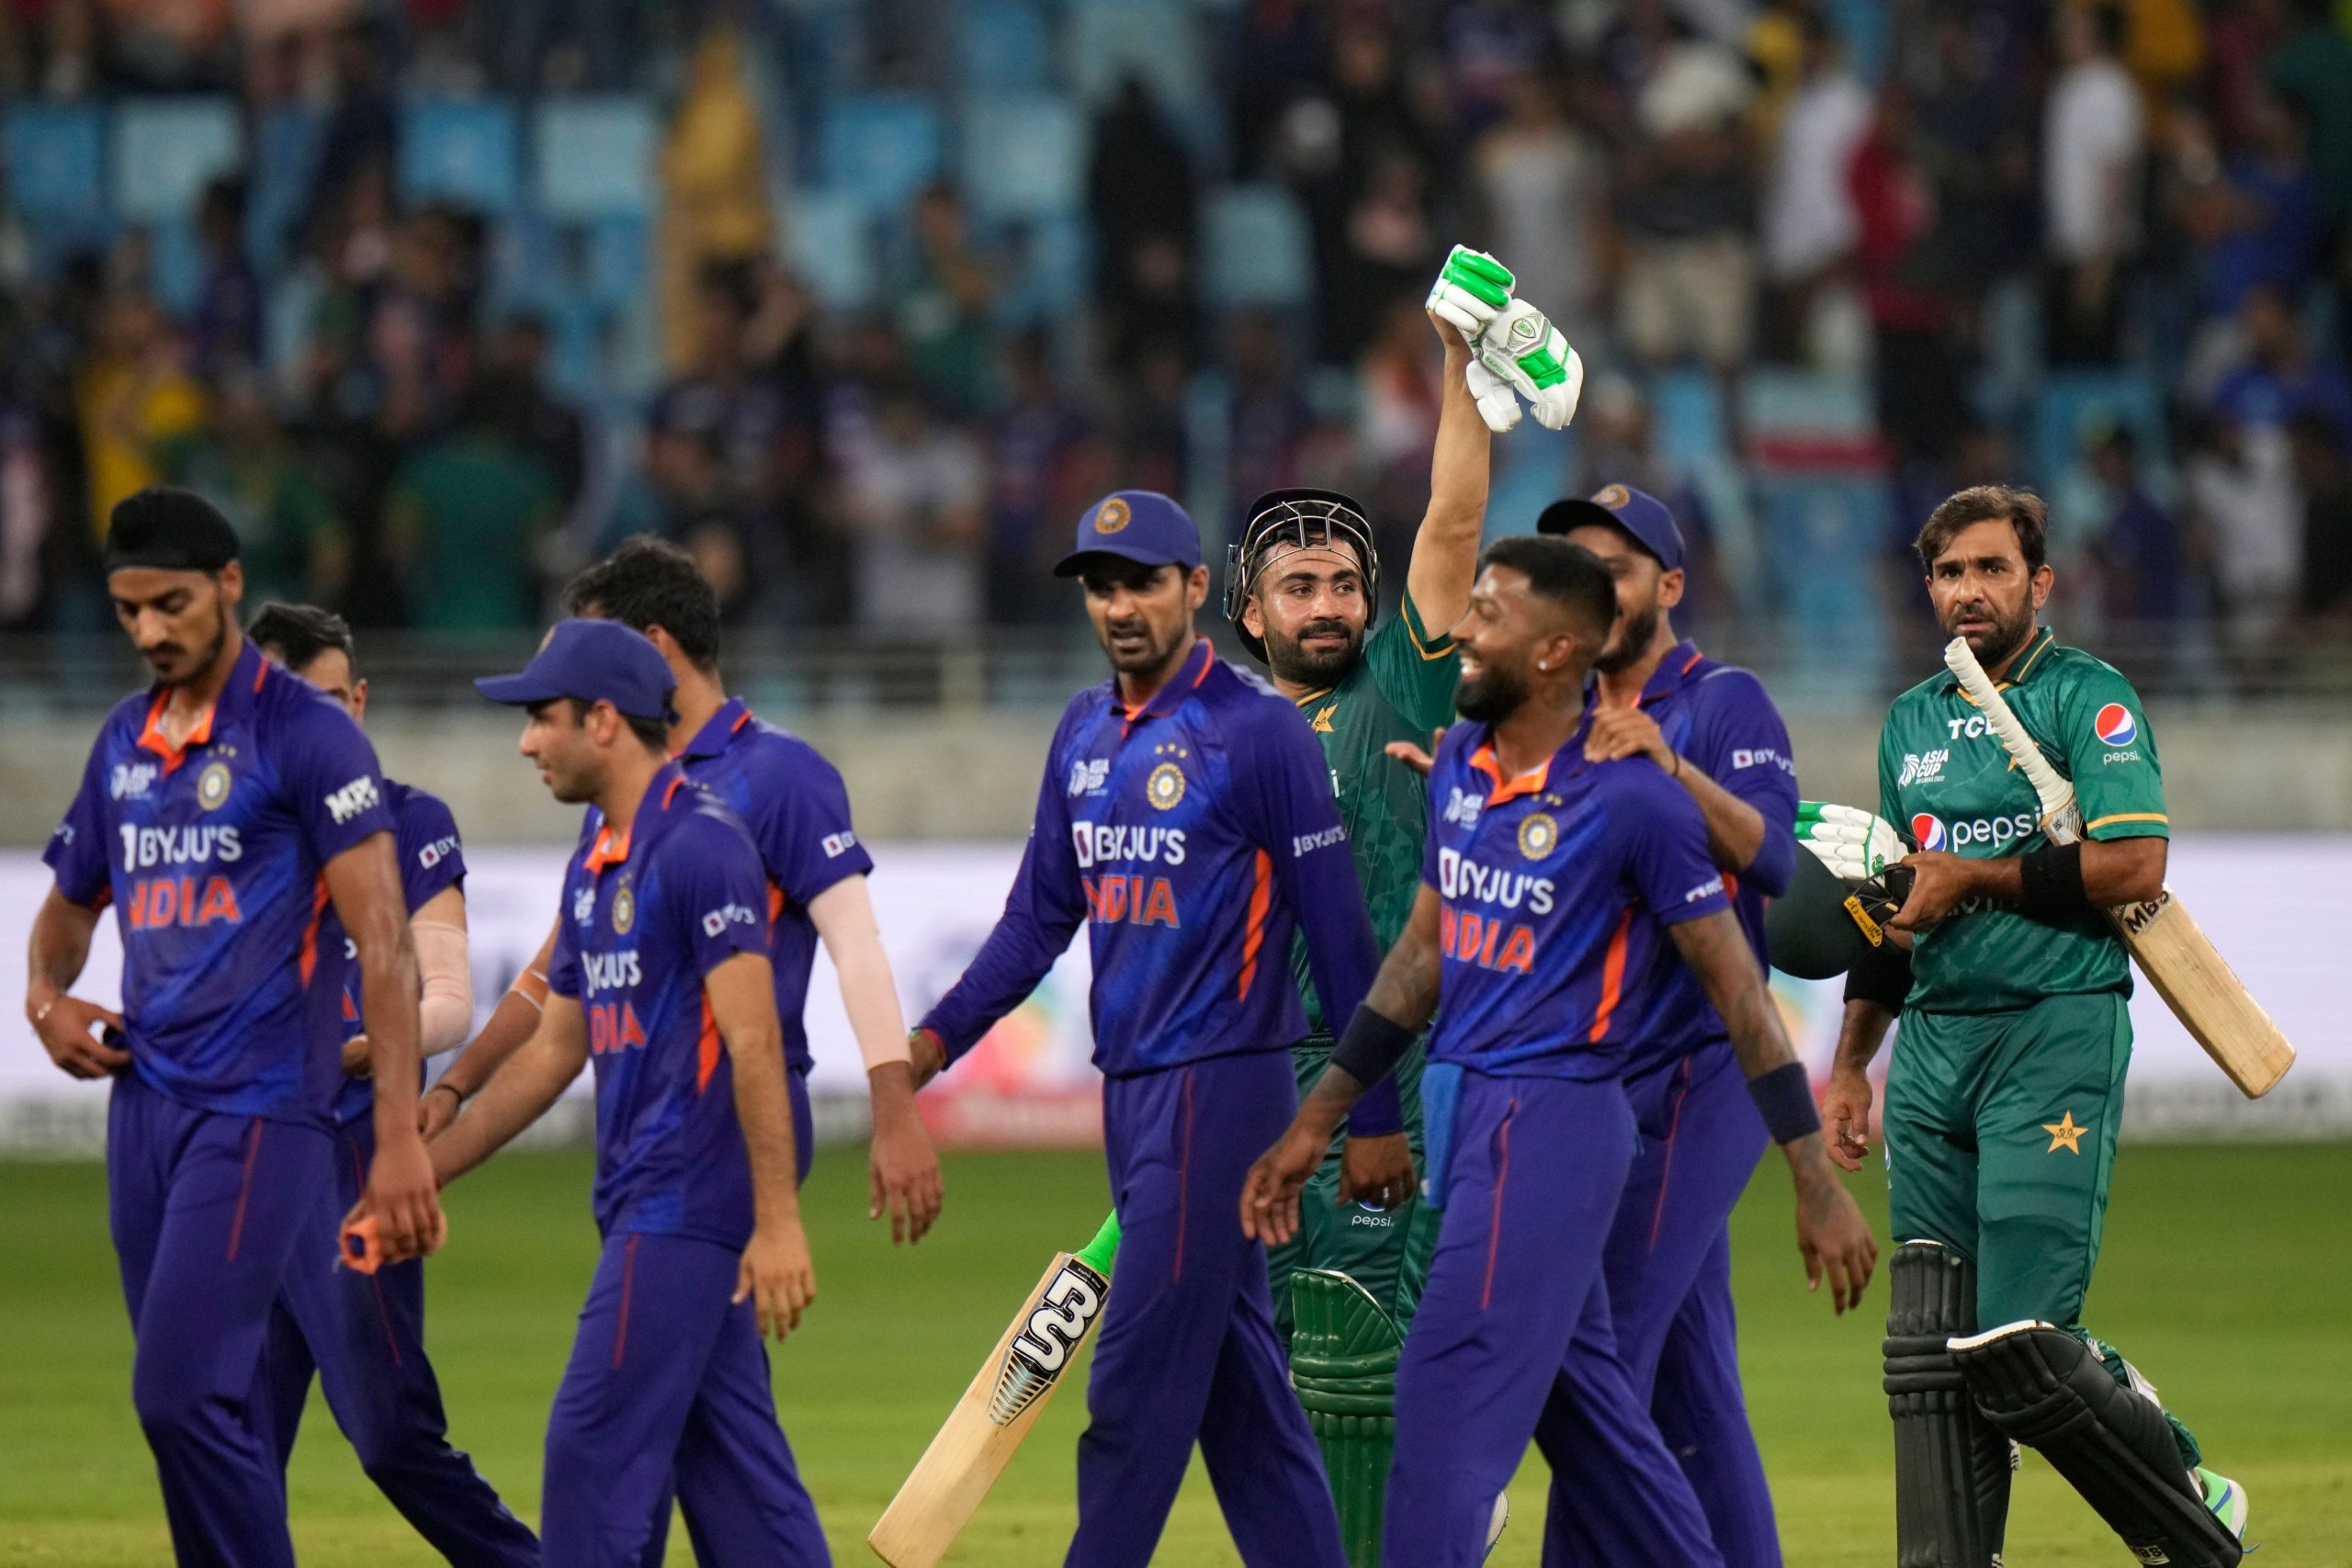 After Pakistan loss, how can India make it to Asia Cup 2022 final?